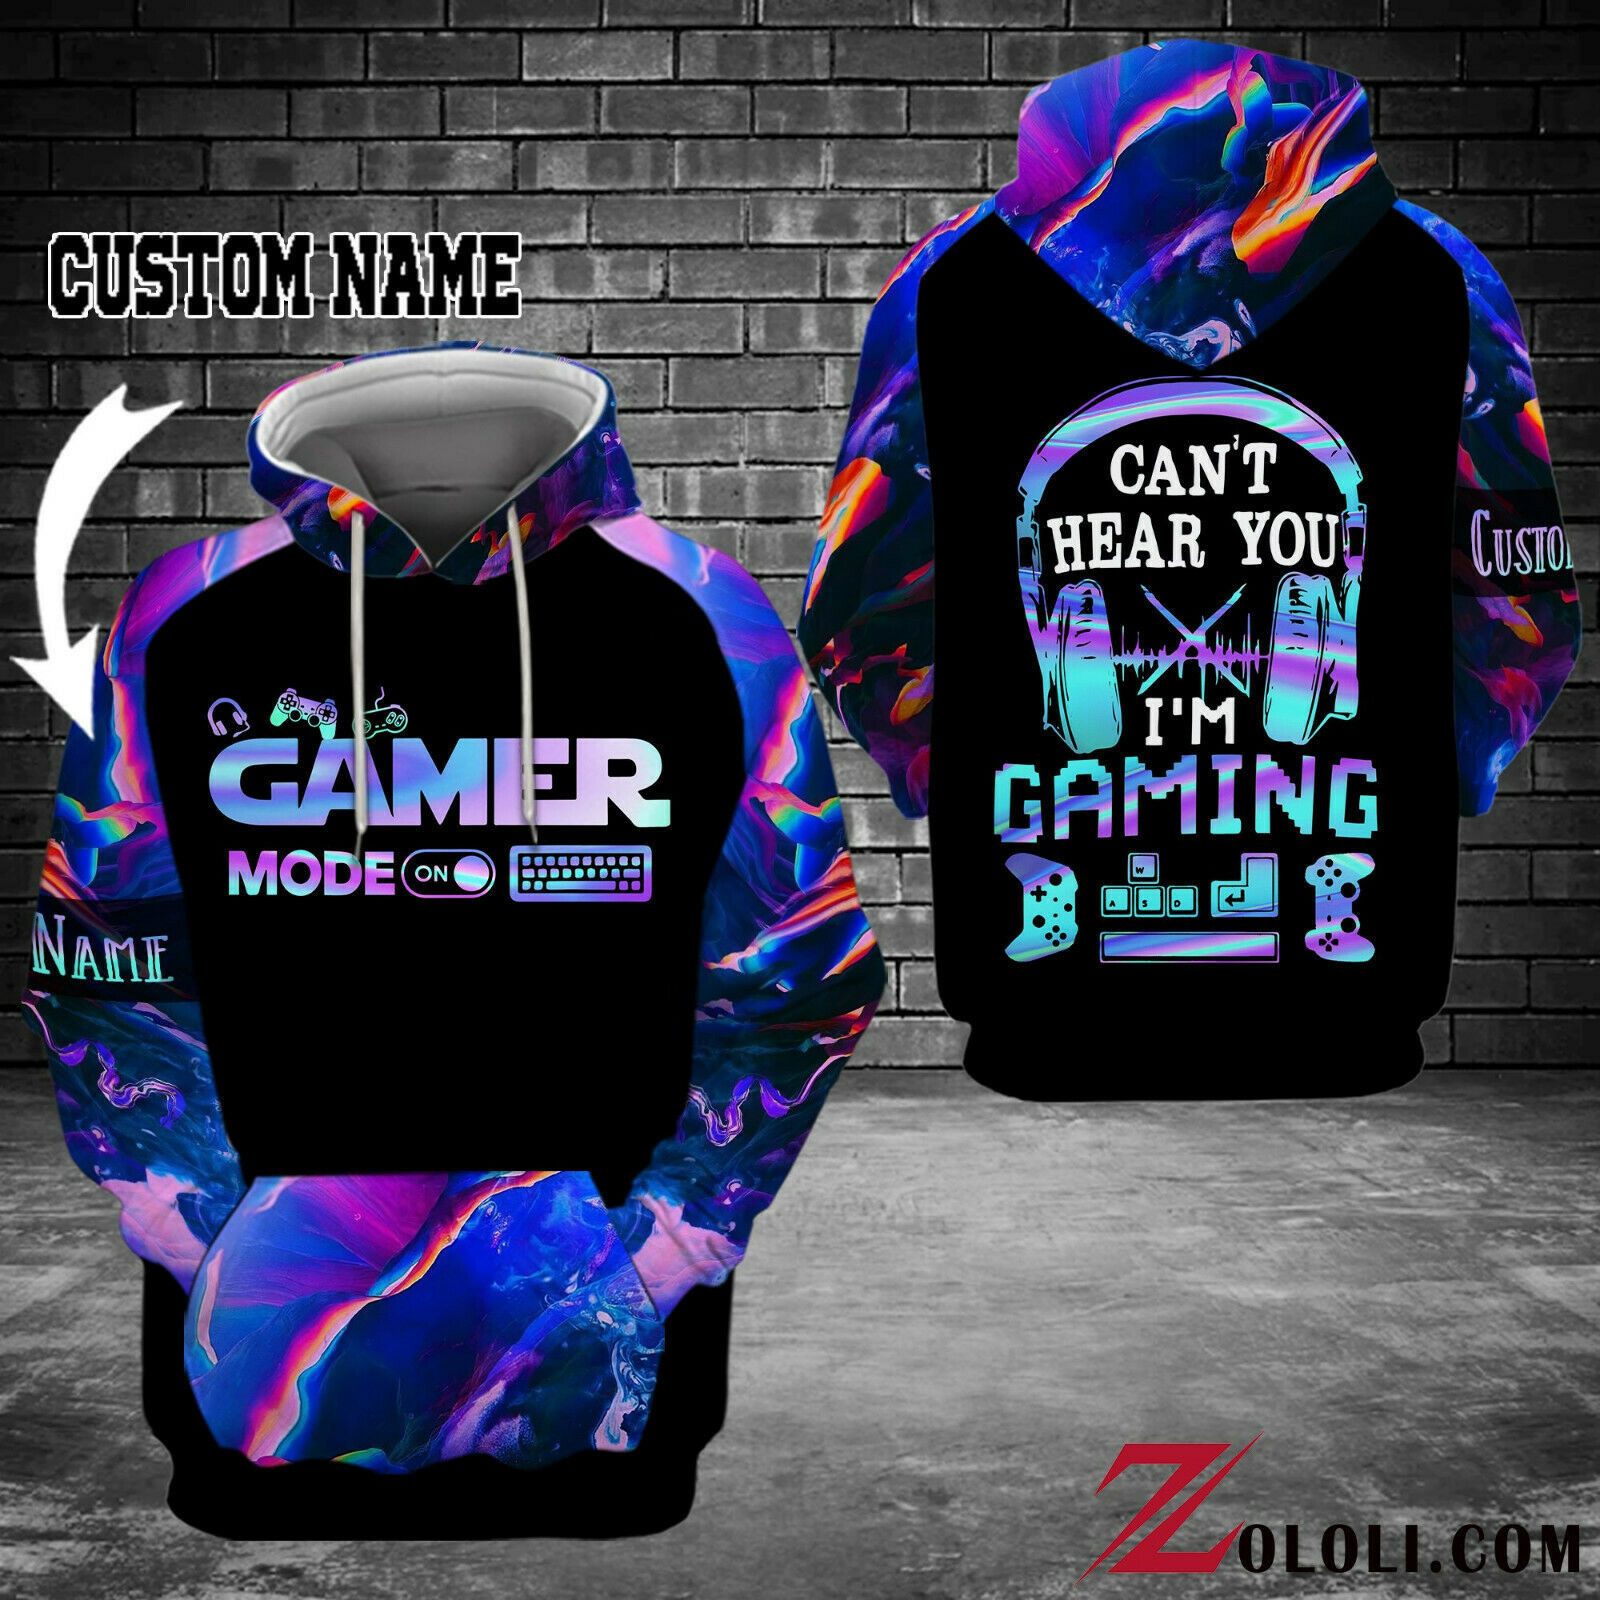 Gamer Mode On Hoodie 3D Custom Funny and Cool Graphic Funny and Cool Graphic